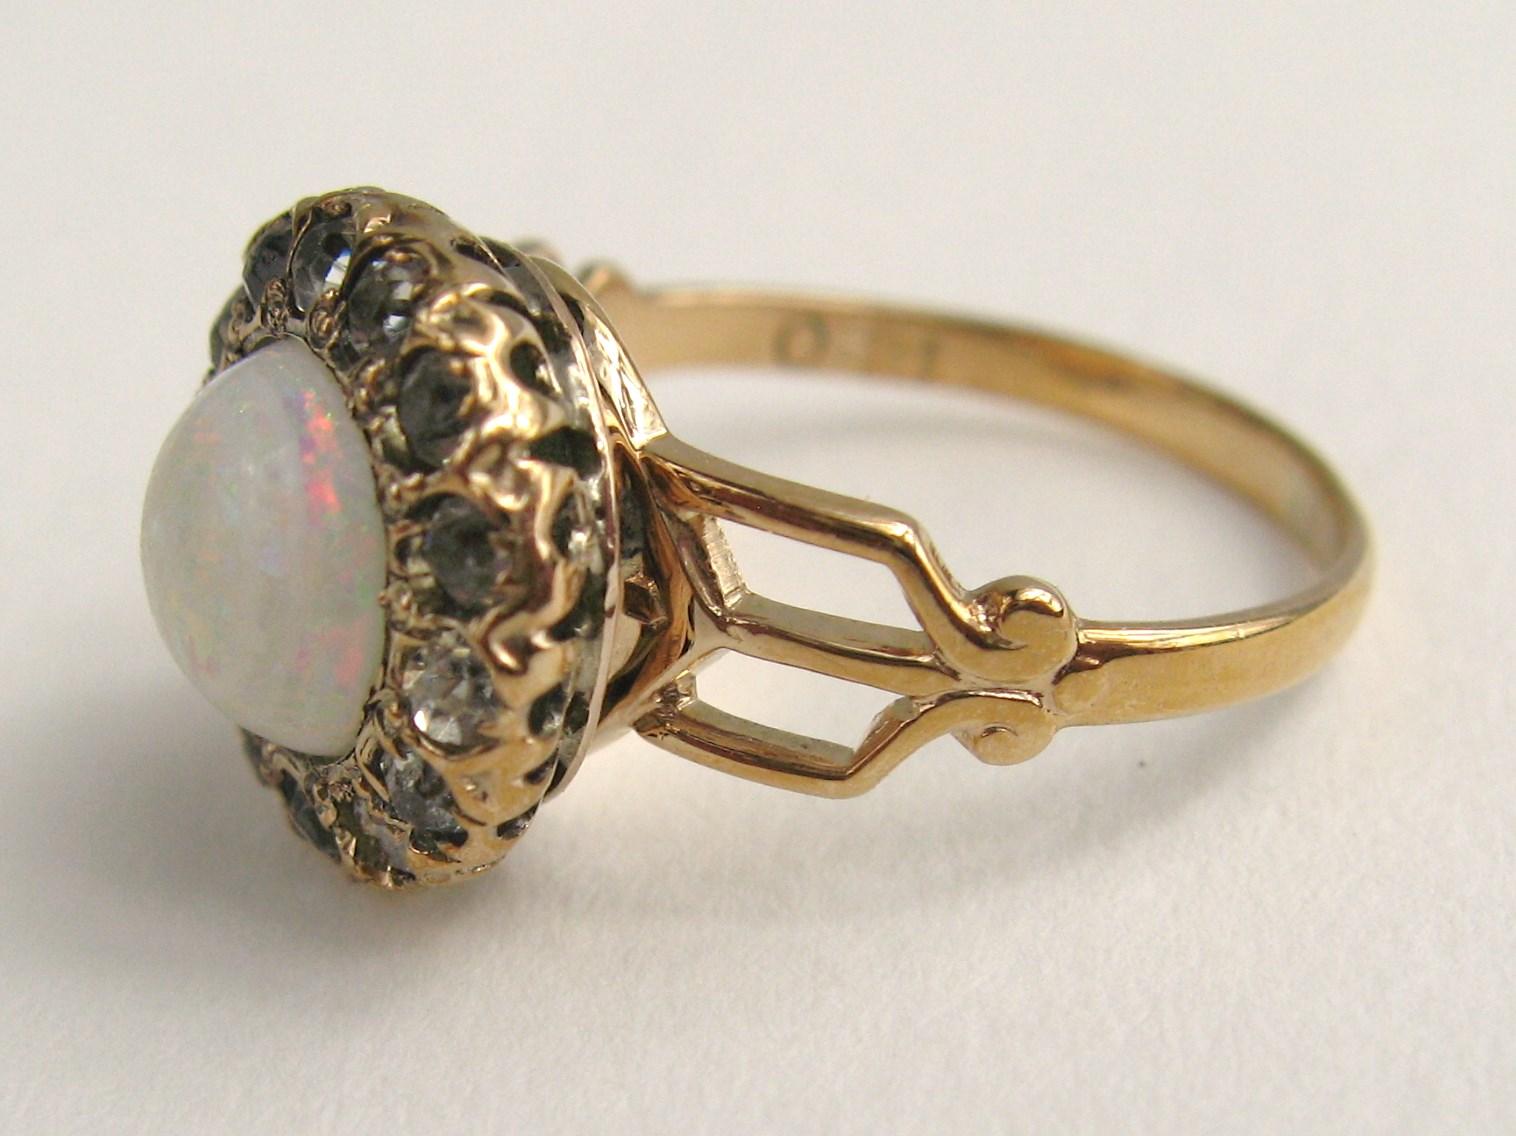 Gold Opal Diamond Halo Ring by Ostby & Barton In Good Condition For Sale In Wallkill, NY